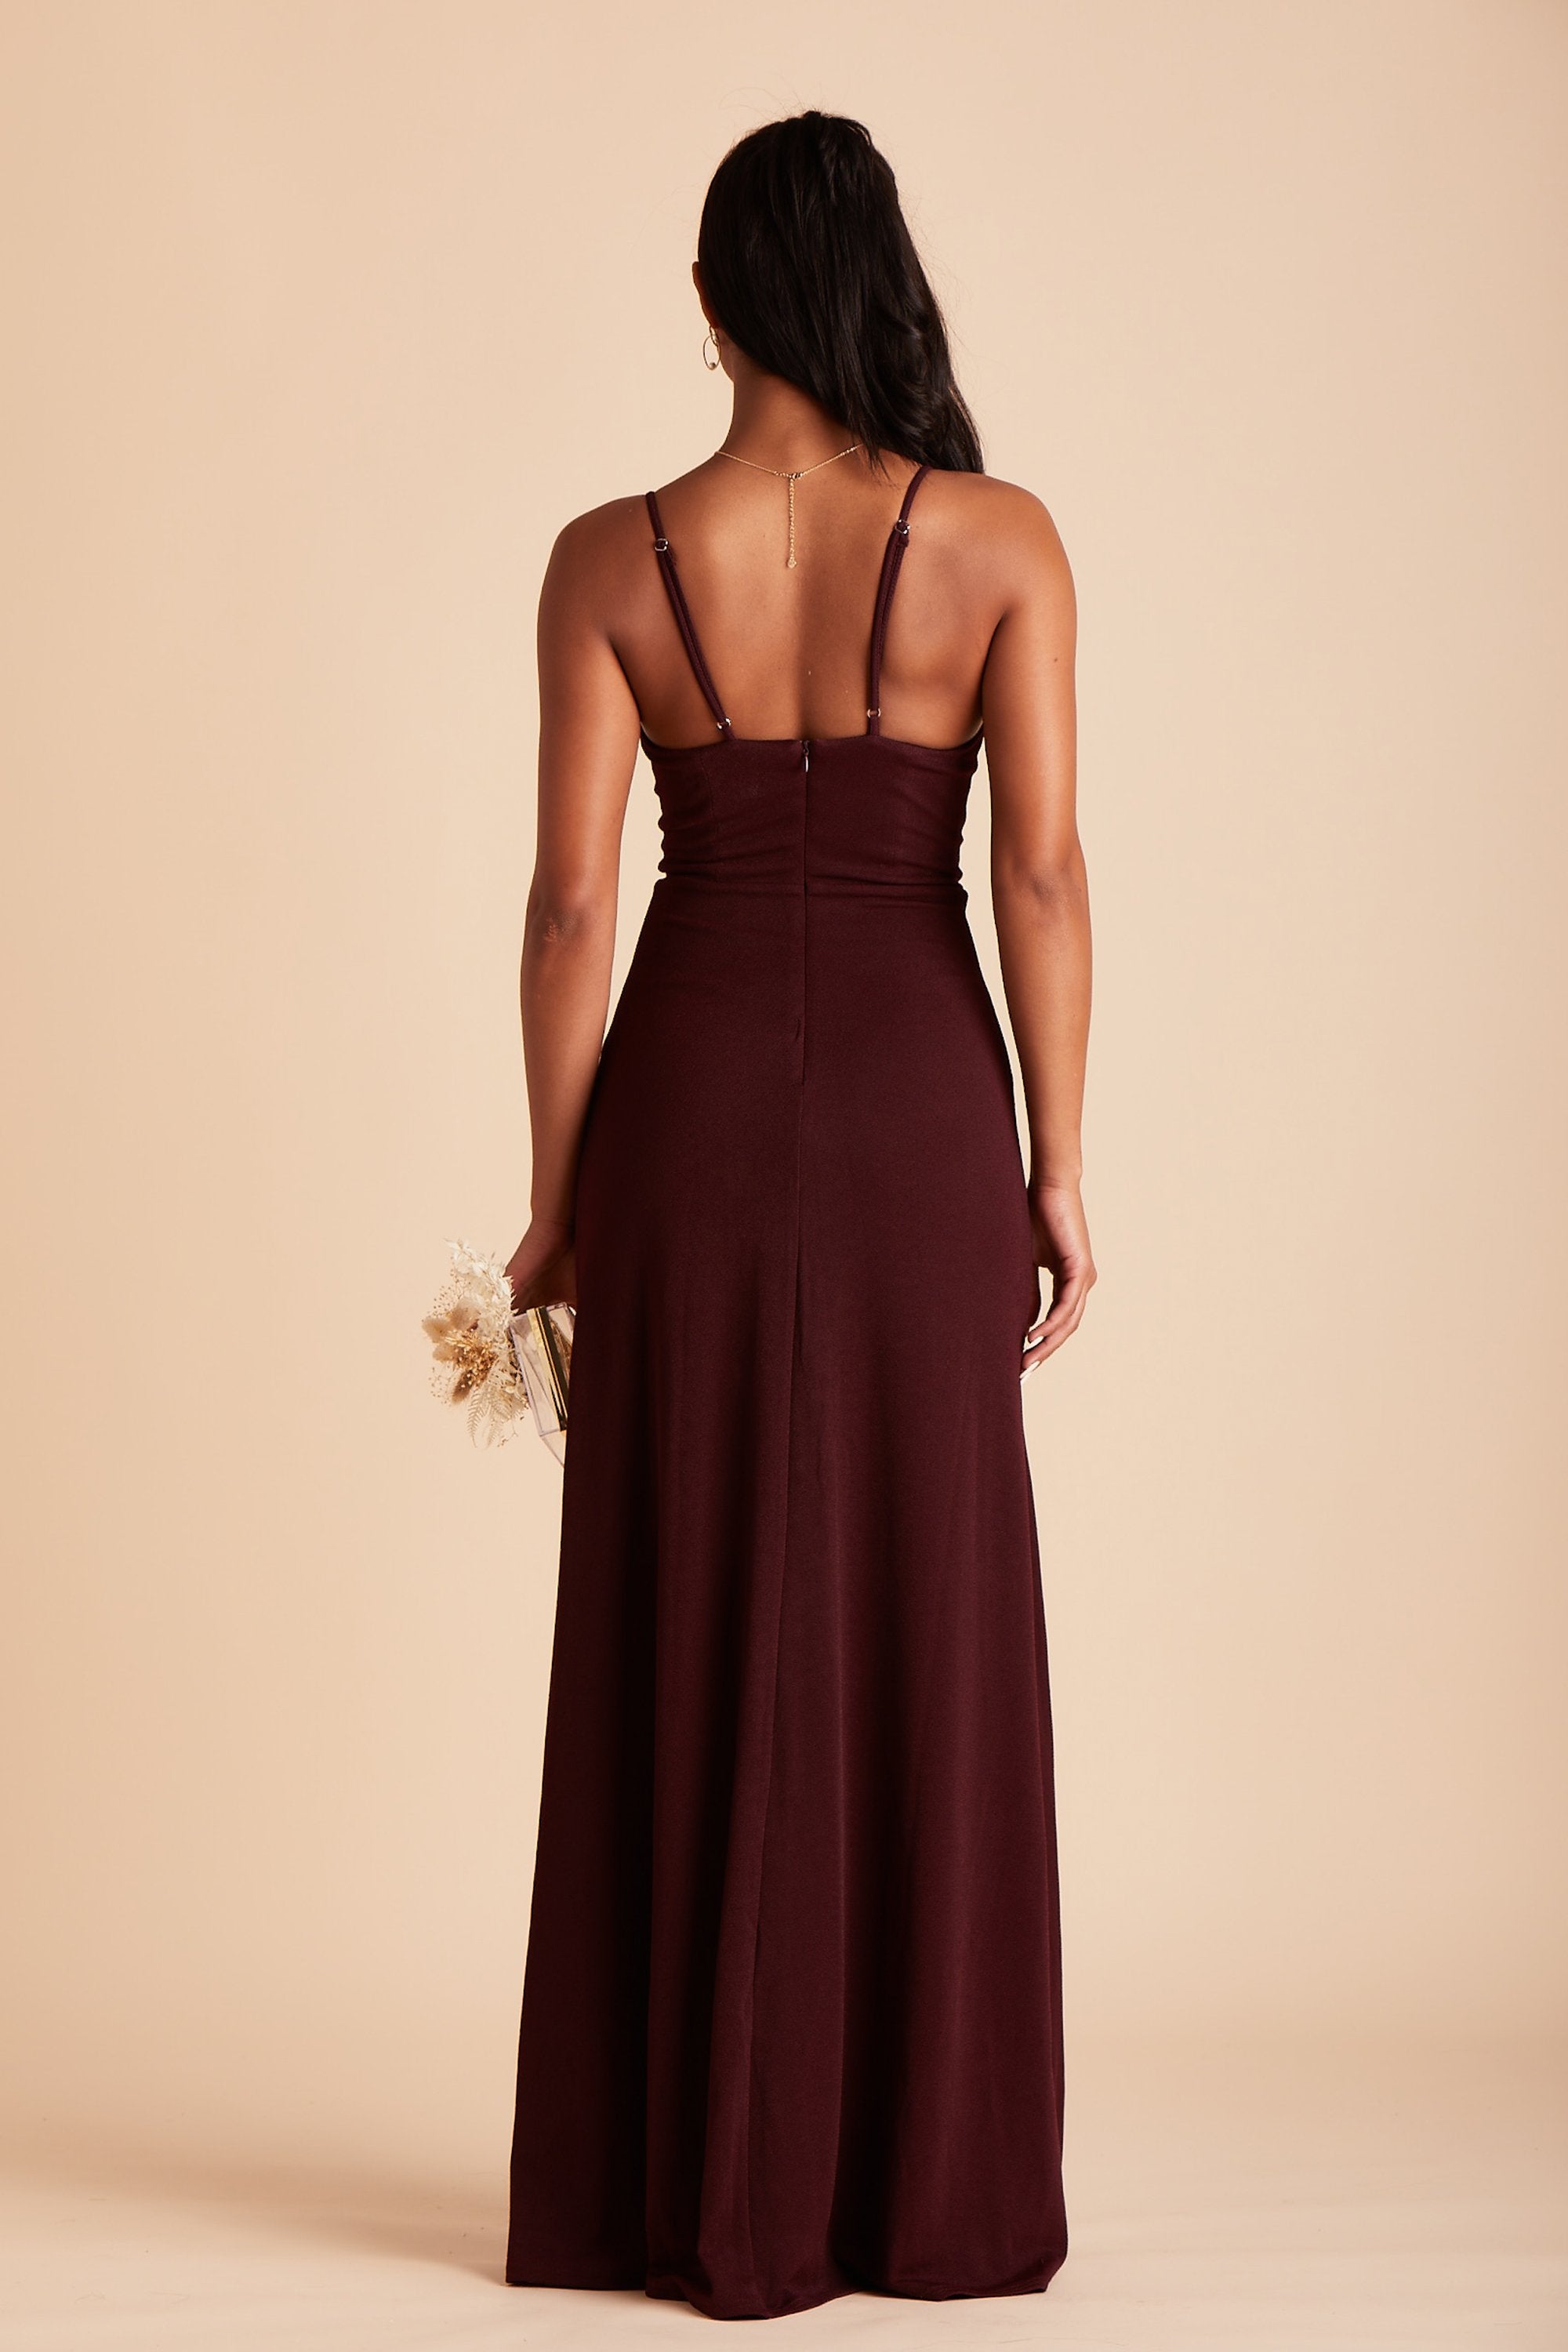 Ash bridesmaid dress in cabernet burgundy crepe by Birdy Grey, back view